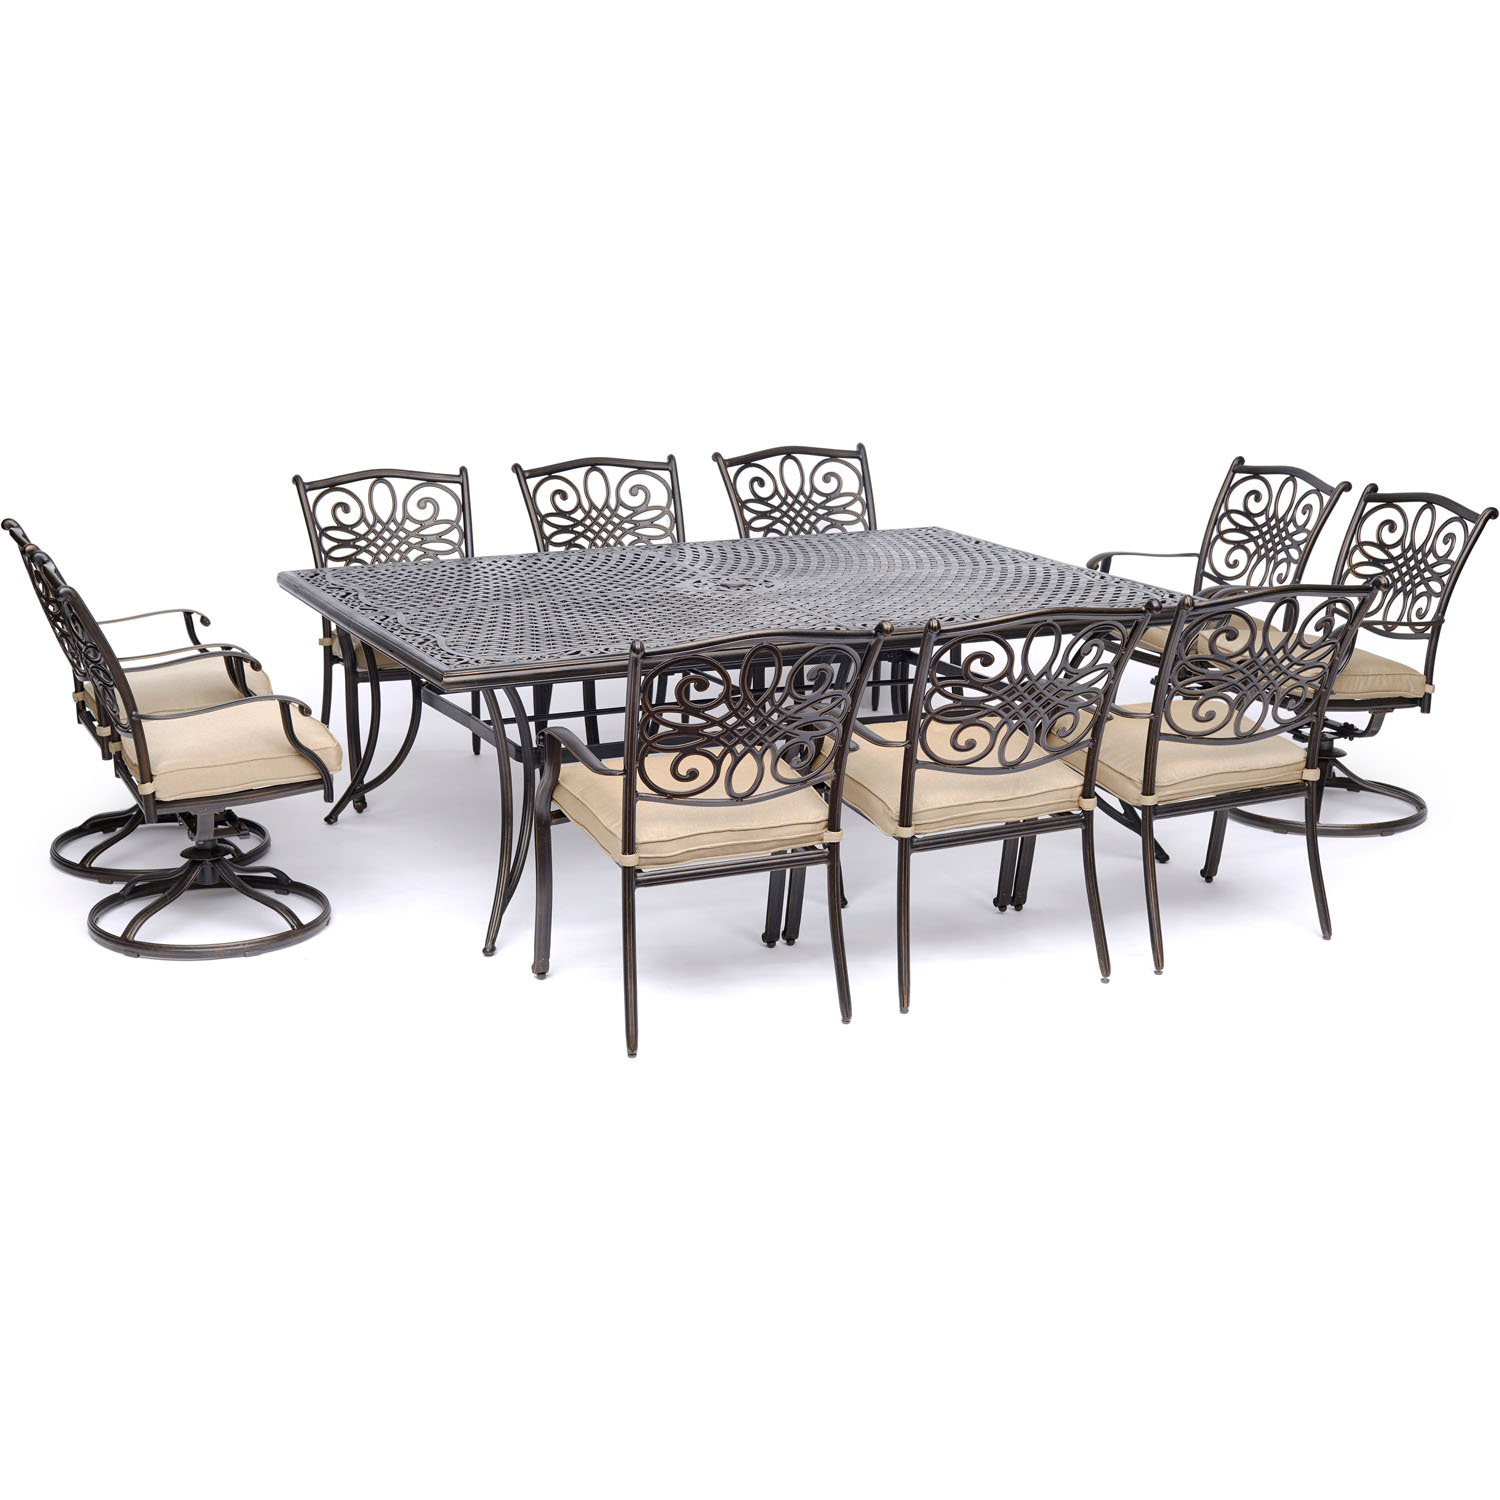 Hanover Traditions 11-Piece Outdoor Patio Dining Set